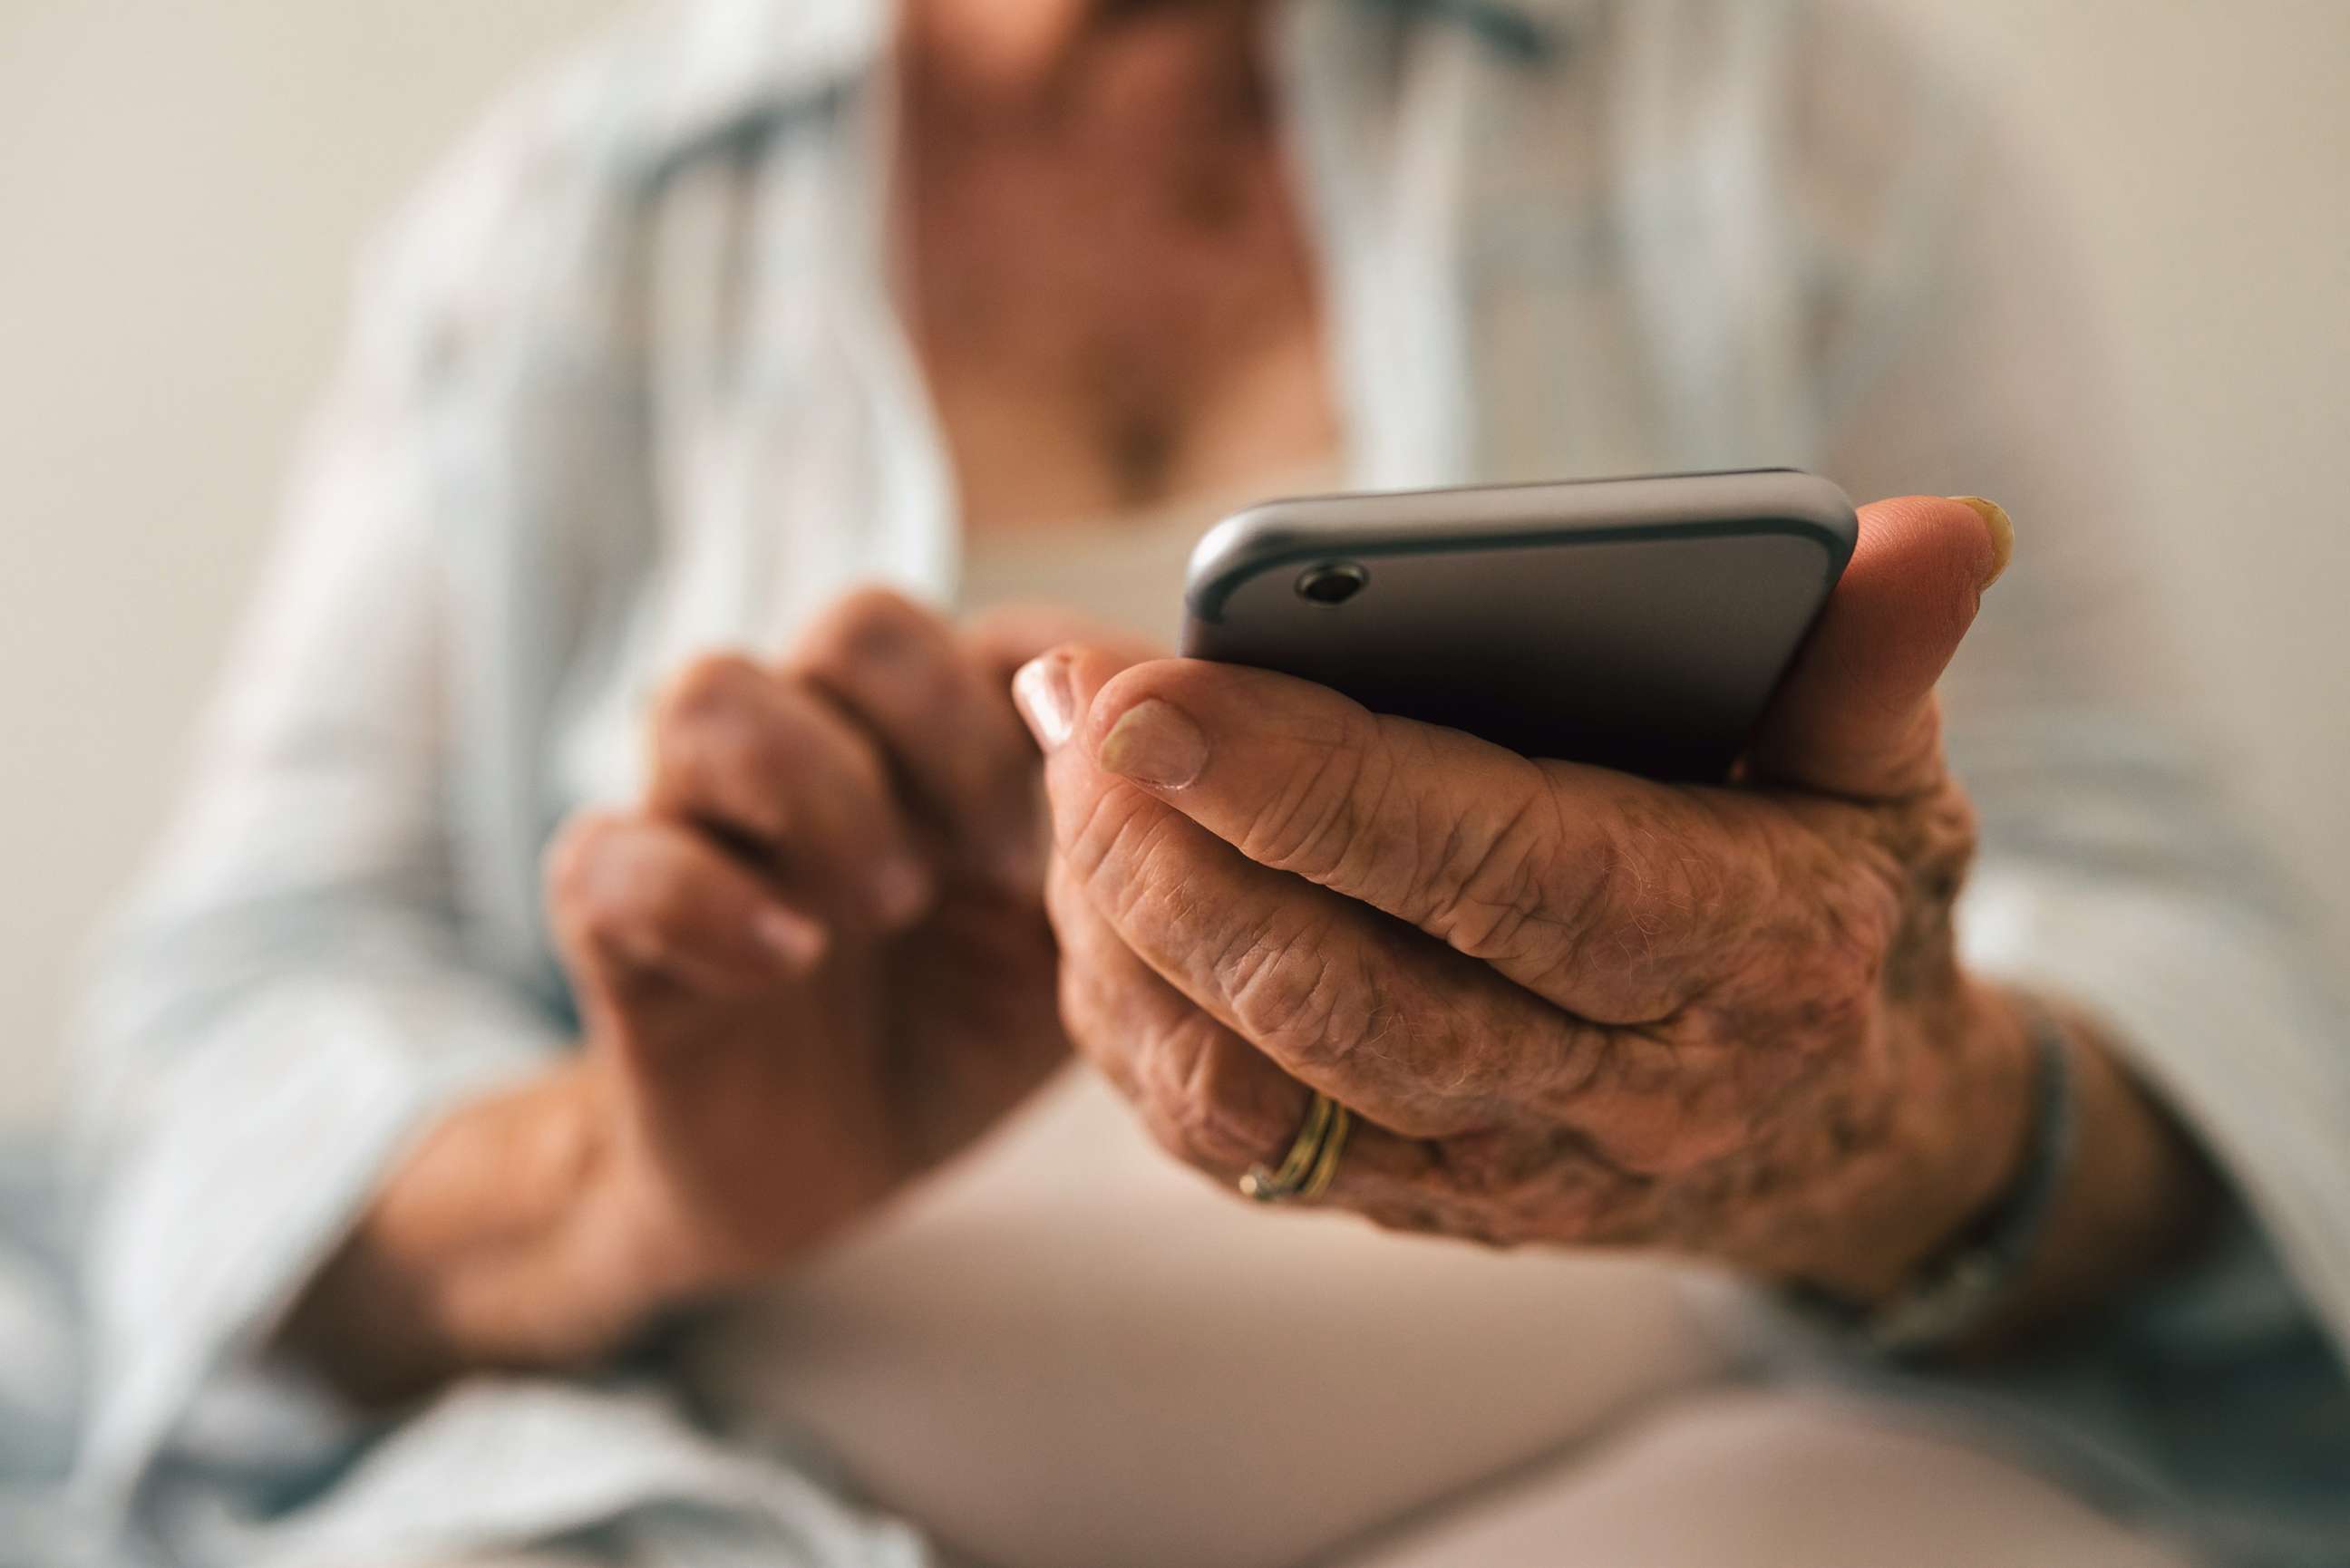 PHOTO: A senior citizen uses a cell phone in an undated stock photo.